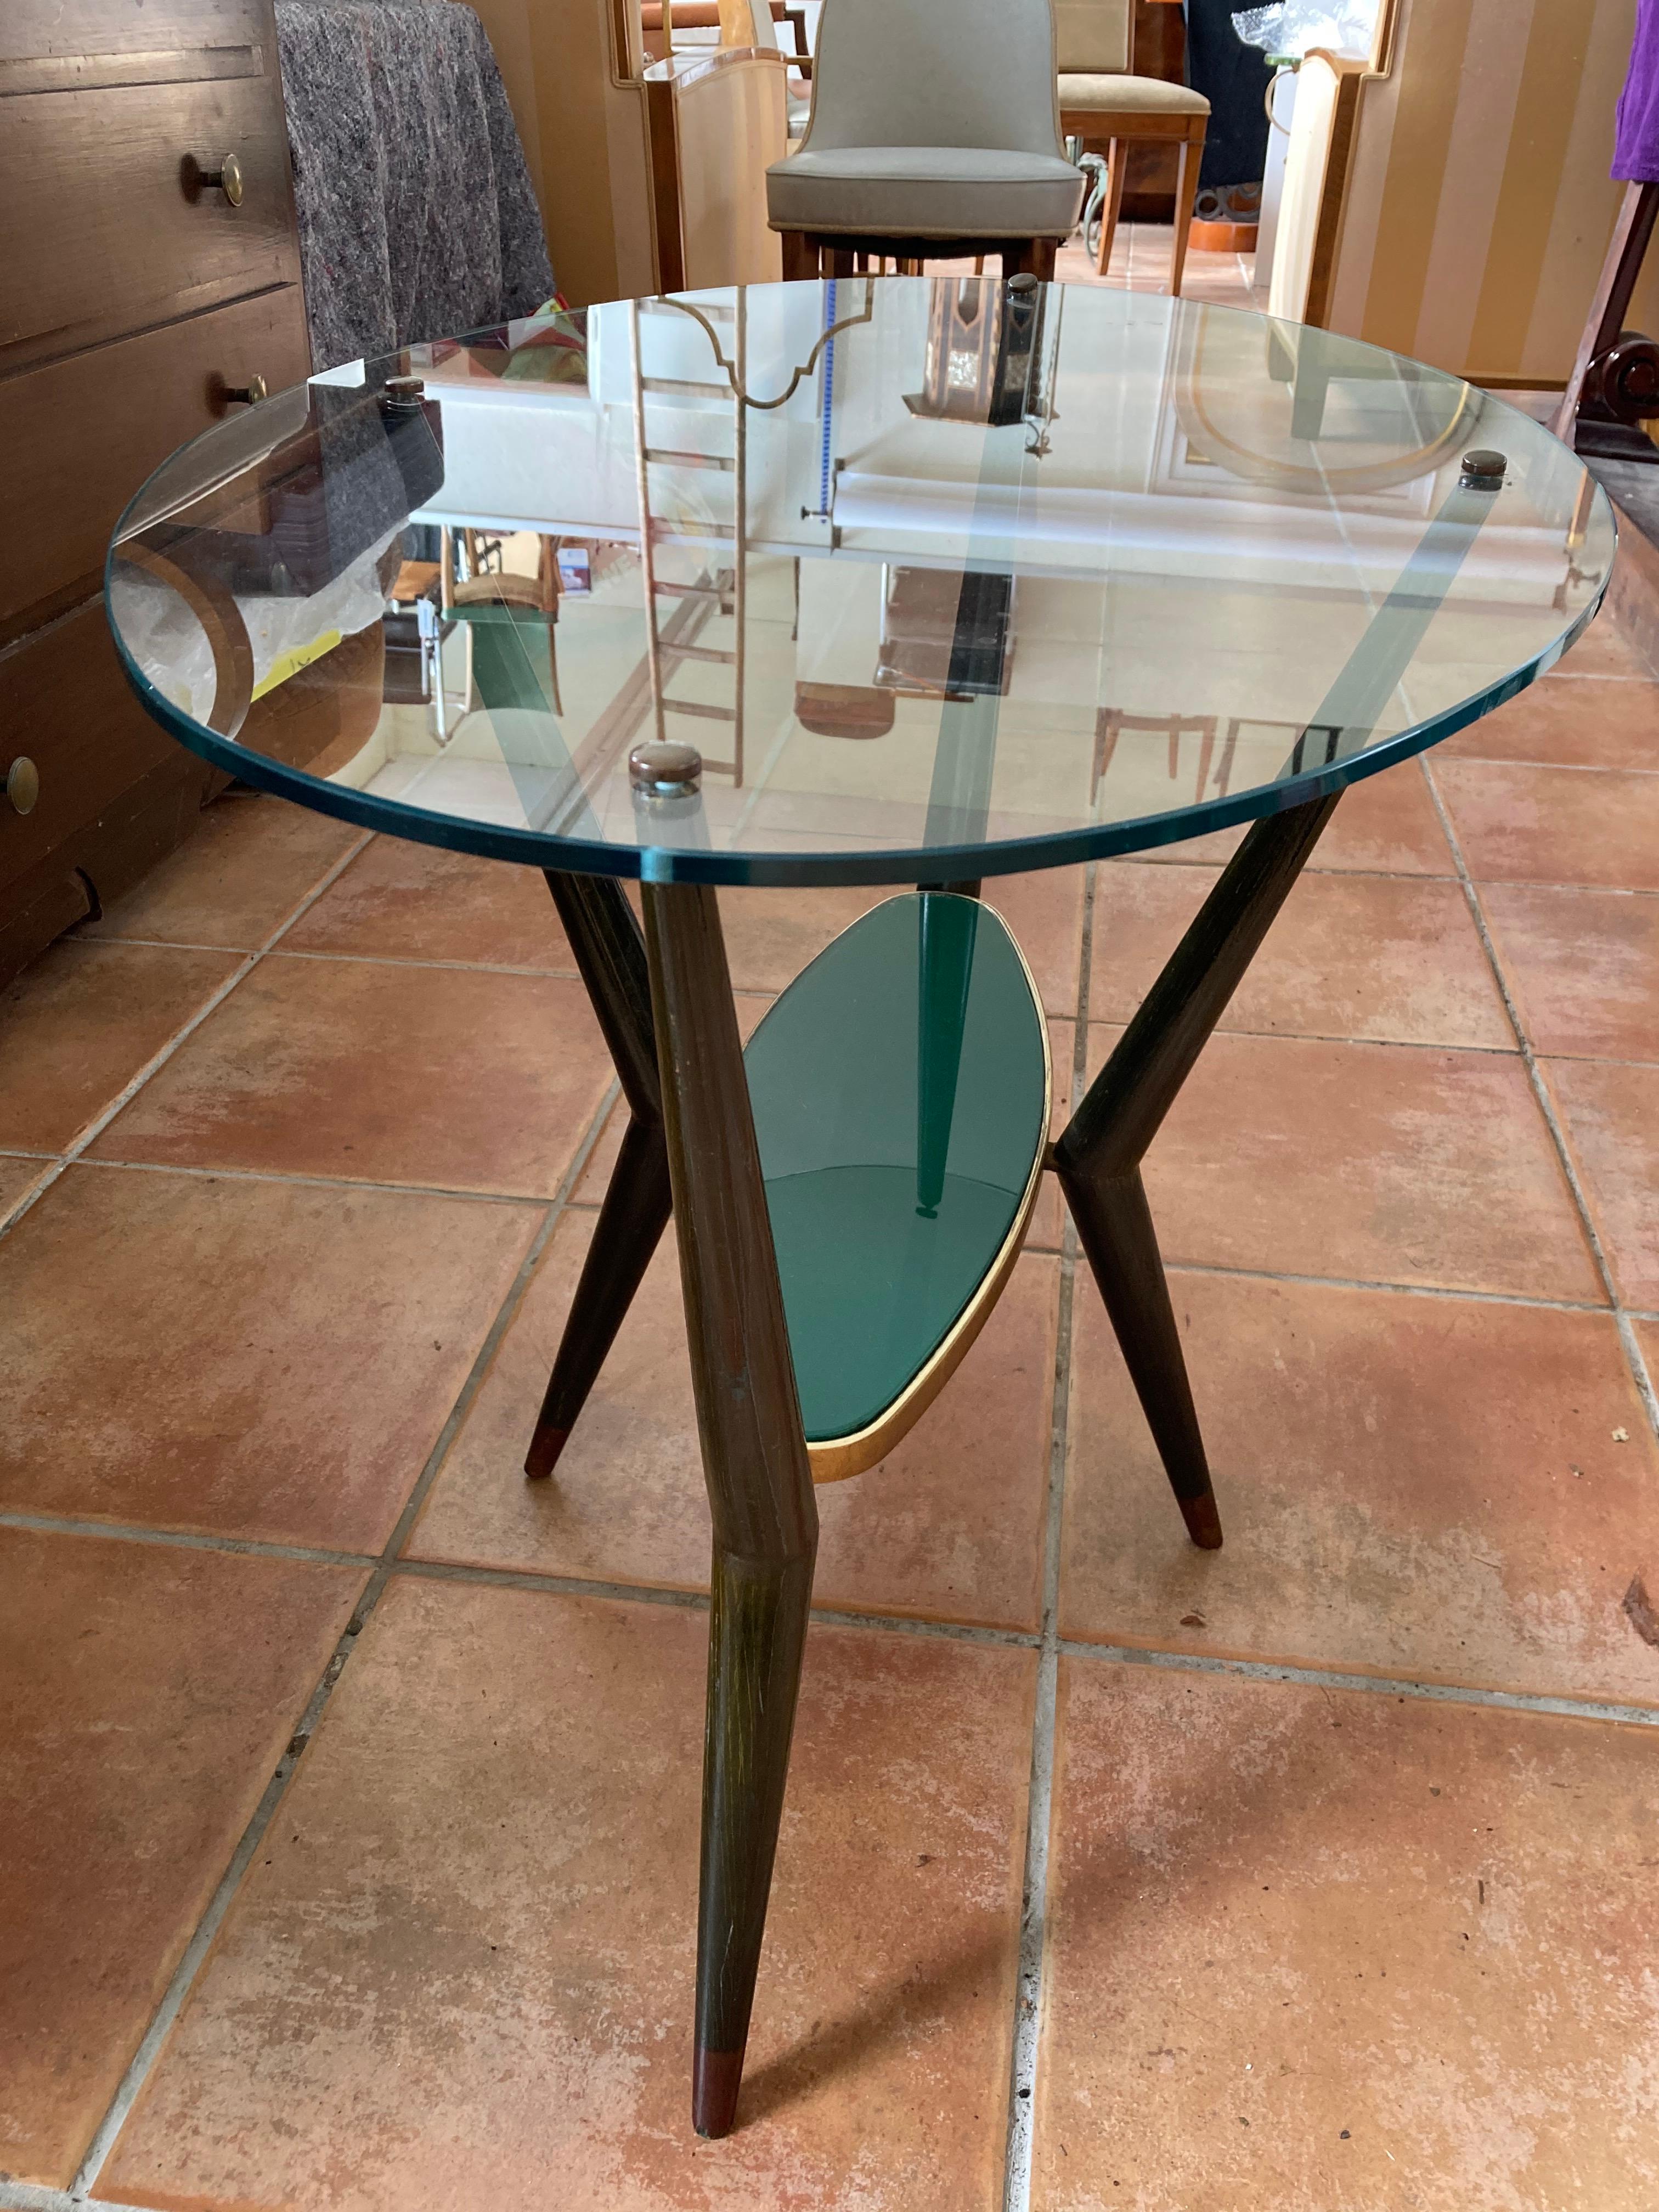 Rare oval Italian Modernist cocktail table in the style of Gio Ponti.
Oval upper glass top.
Conical green and red patinated wooden legs.
The lower small green glass top is inlaid .
The upper glass top is screwed on the wooden frame and has small